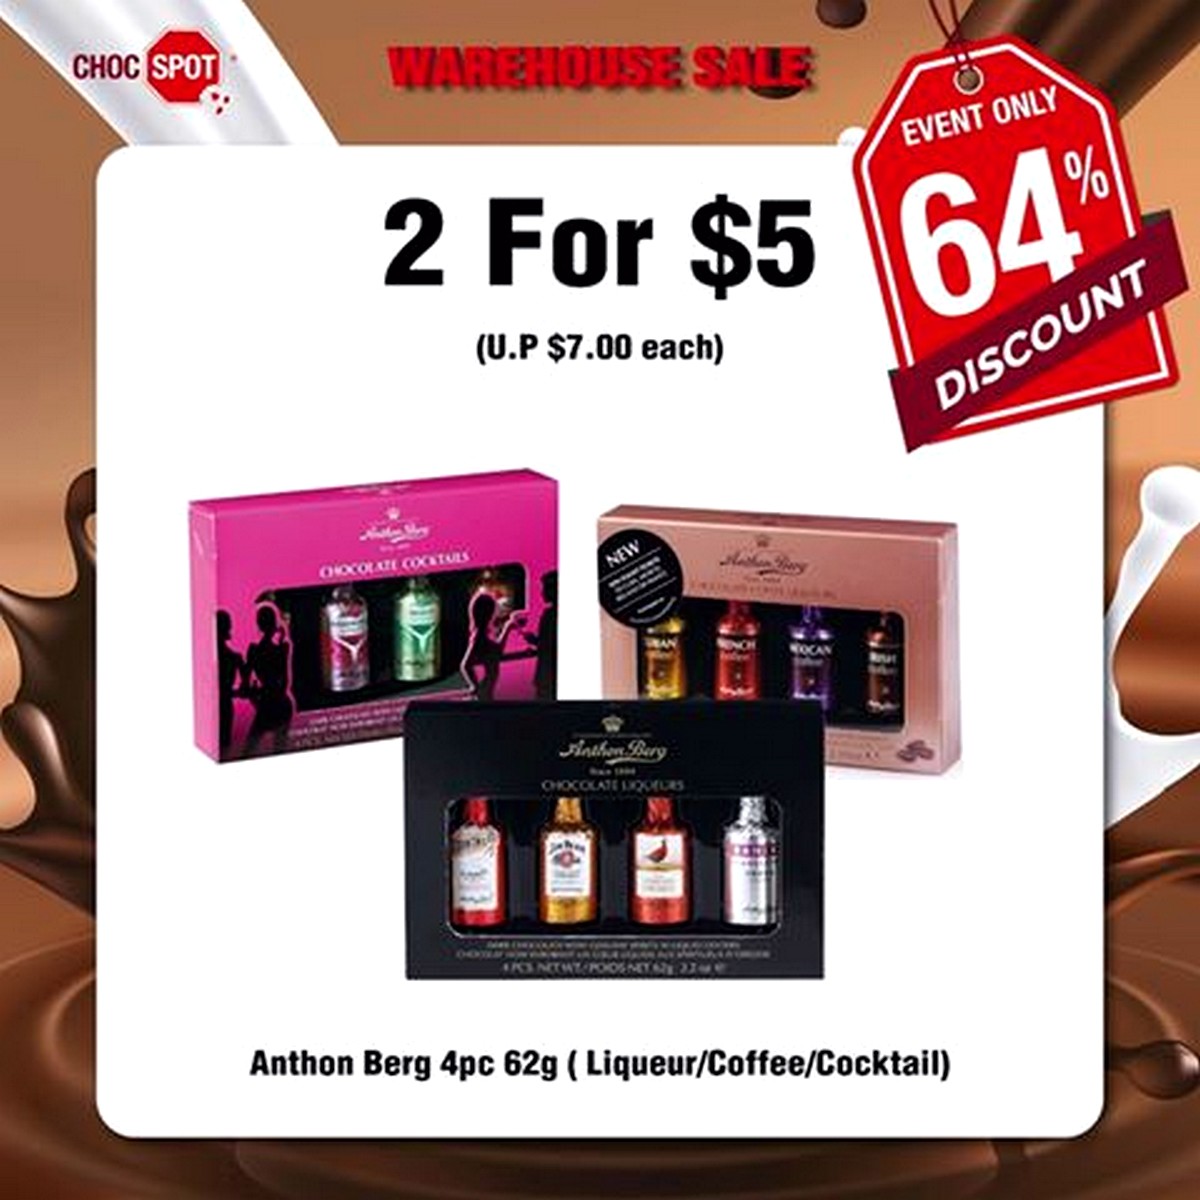 Choc-Spot-Warehouse-Sale-Highlights-002 24 Jul-2 Aug 2020: Choc Spot Warehouse Sale! Up to 80% off Chocolates, Sweets, Chips, Biscuits!